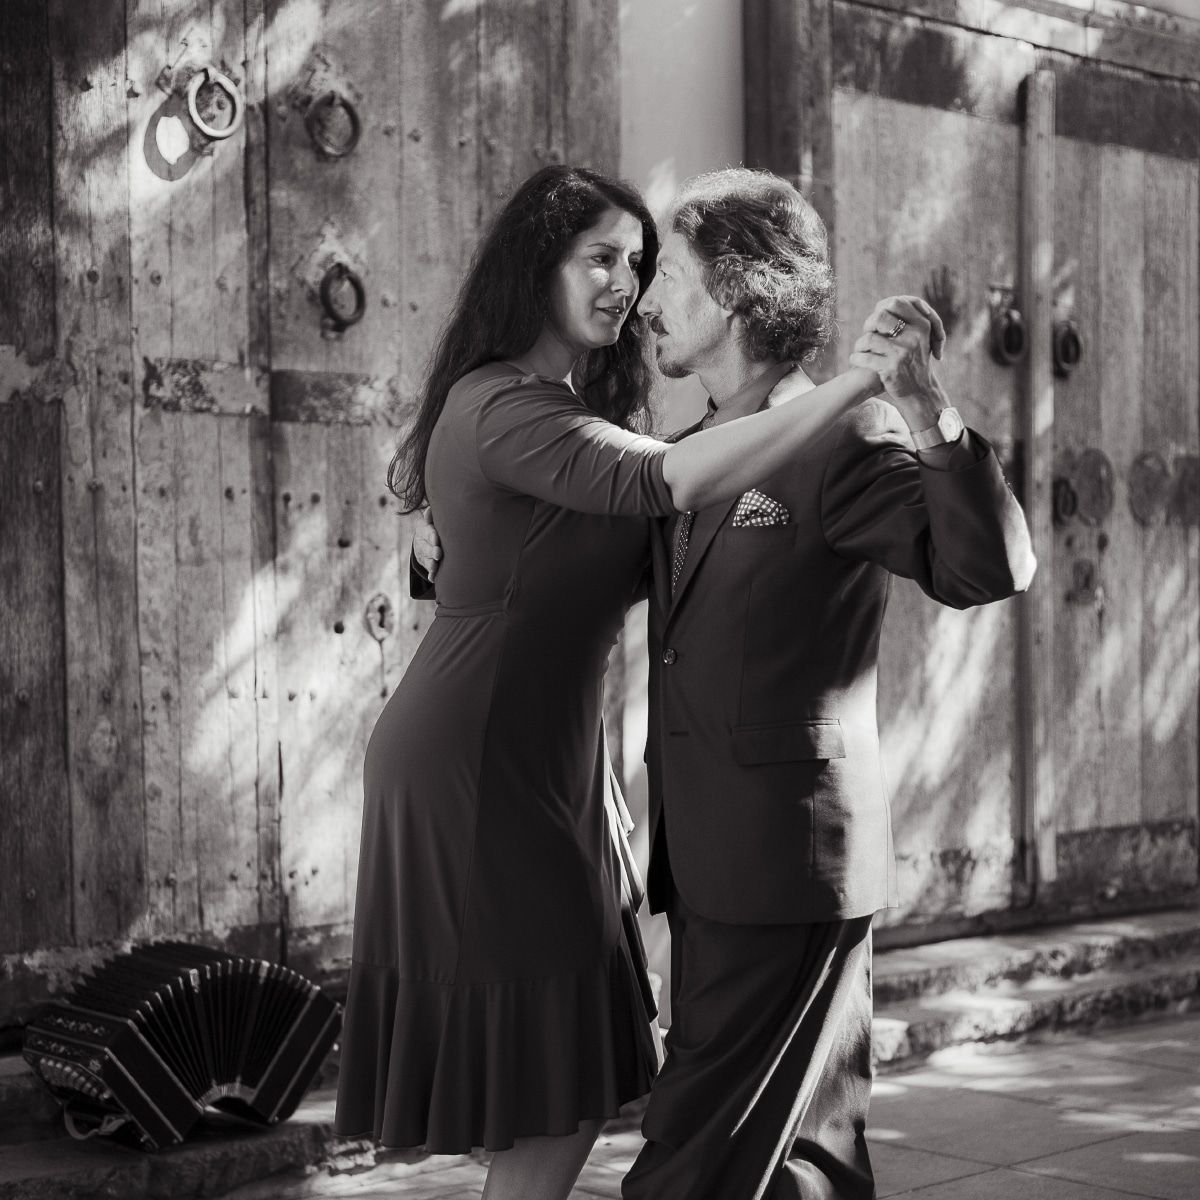 Dancing argentine tango Marcelo Solis and Mimi black and white